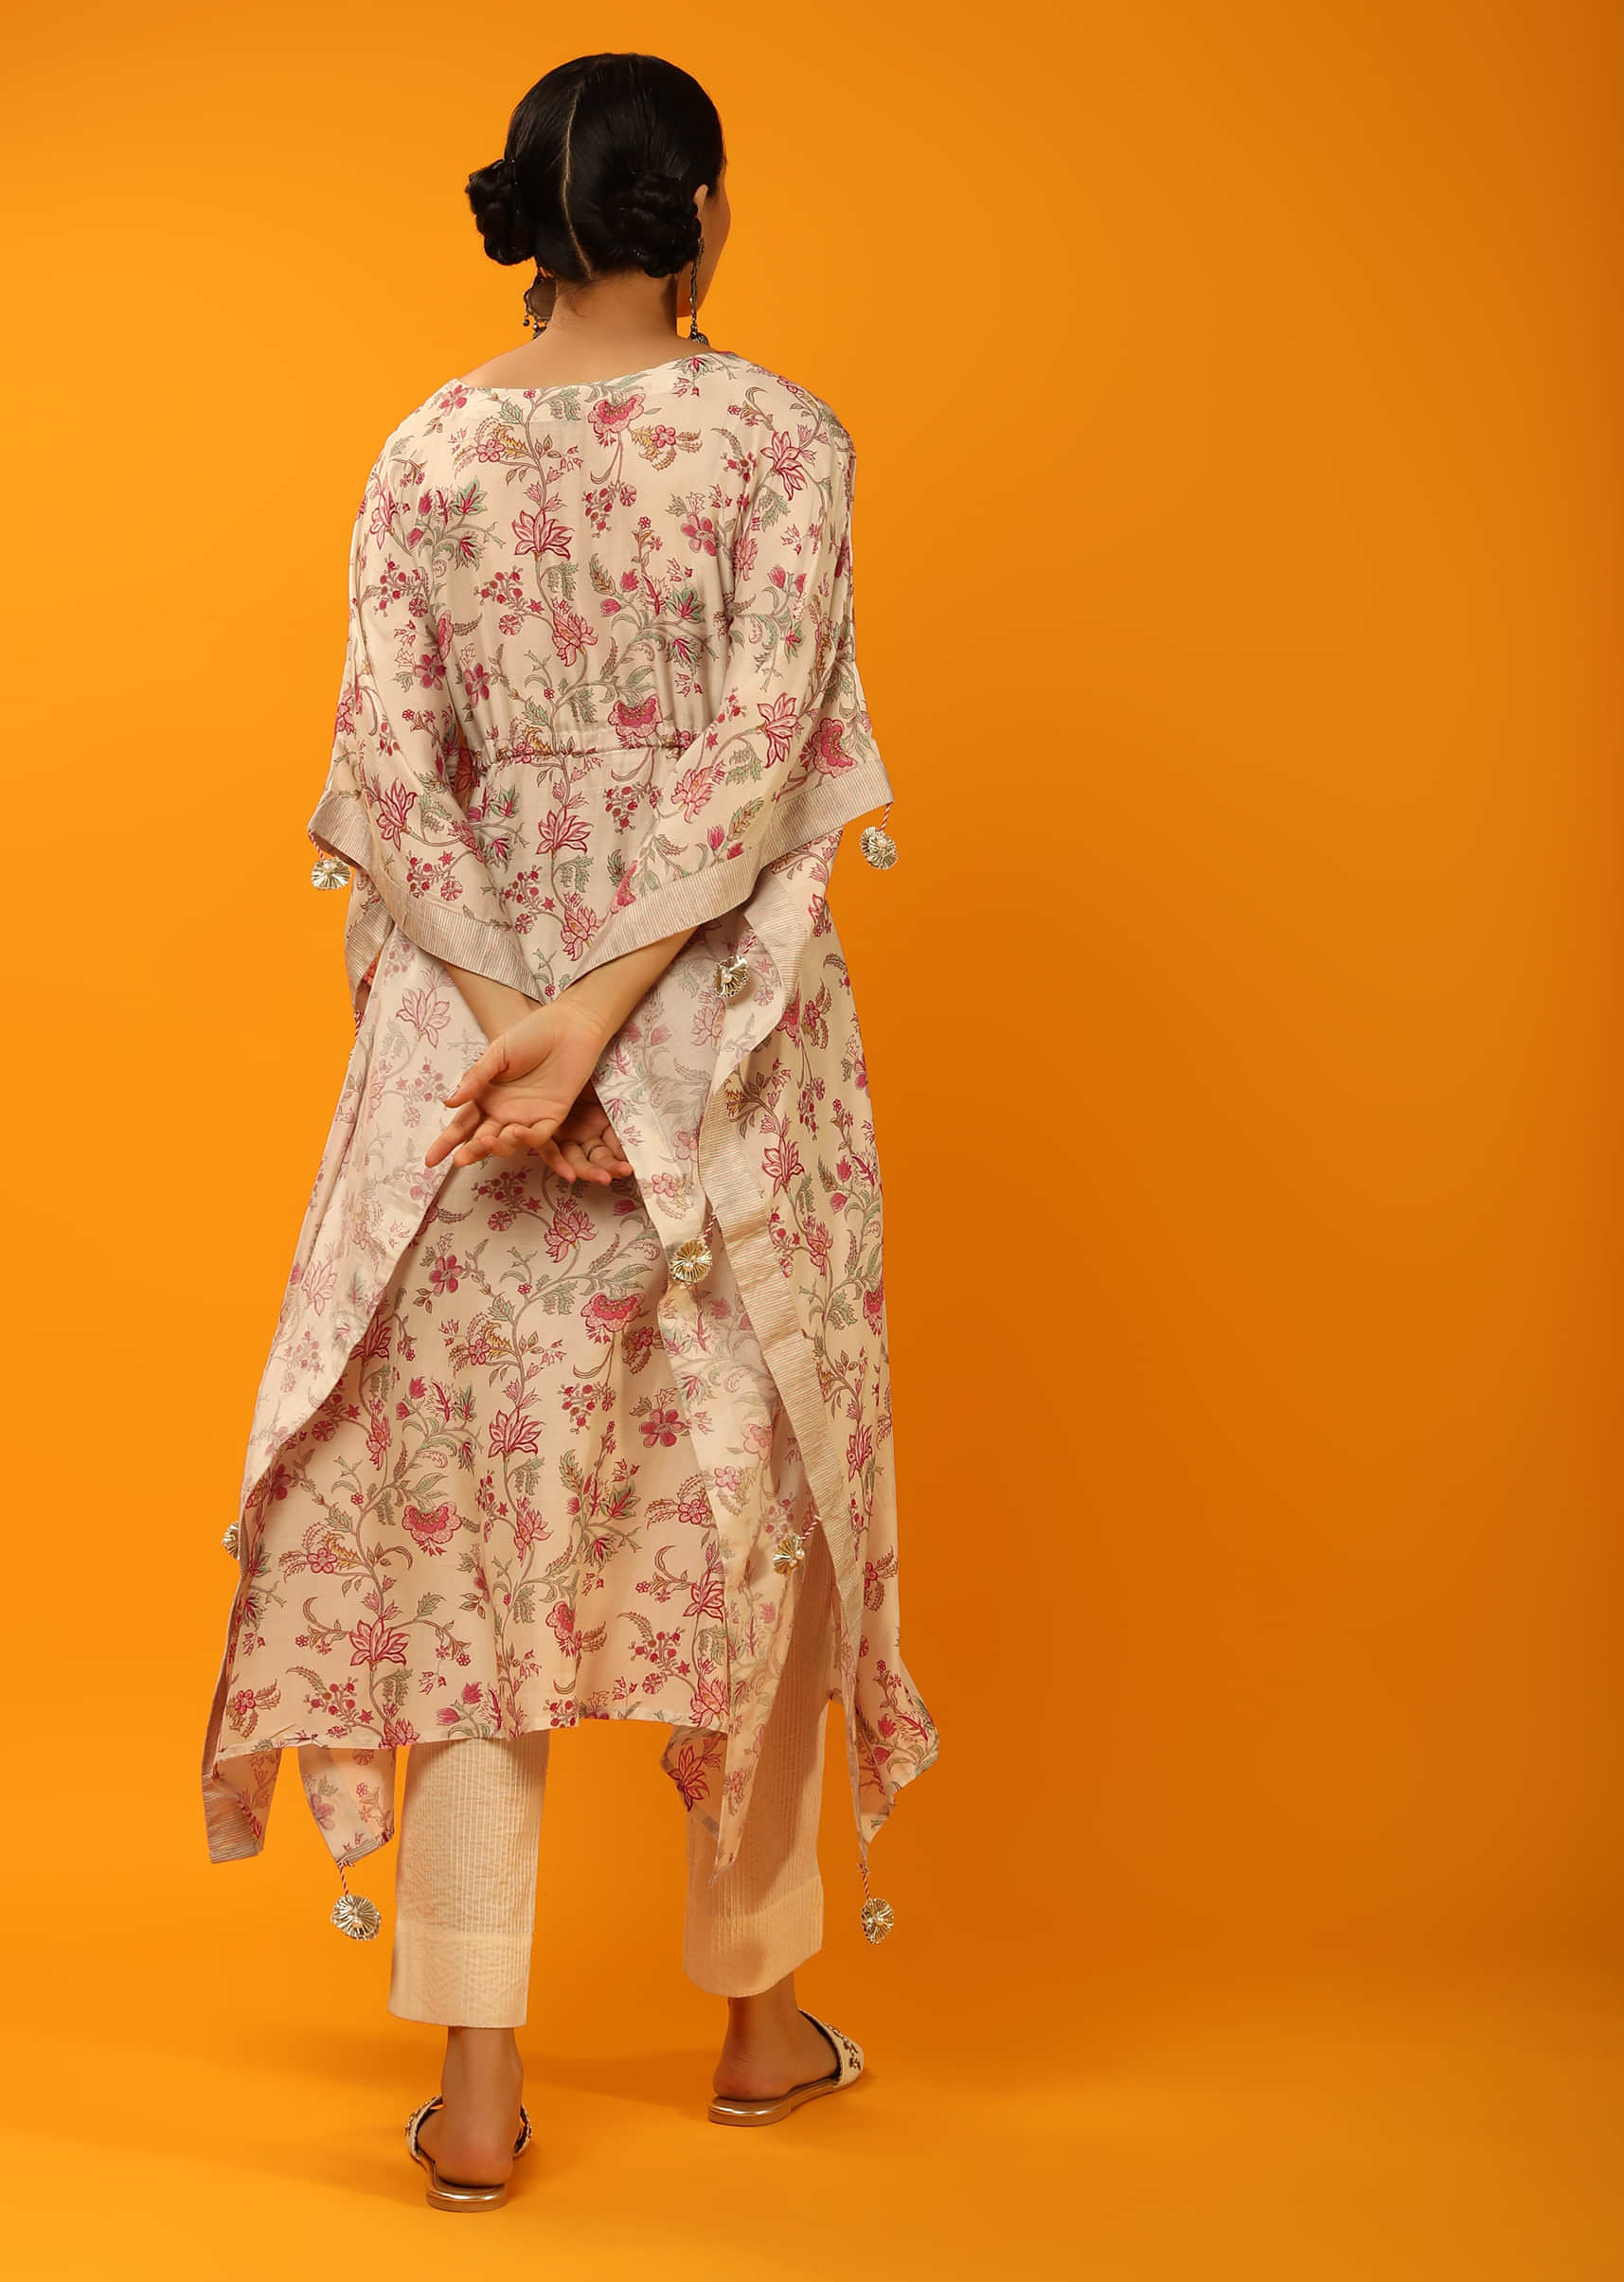 Off White Kaftan In Cotton With Multi Colored Floral Print And Mirror Work Online - Re By Kalki